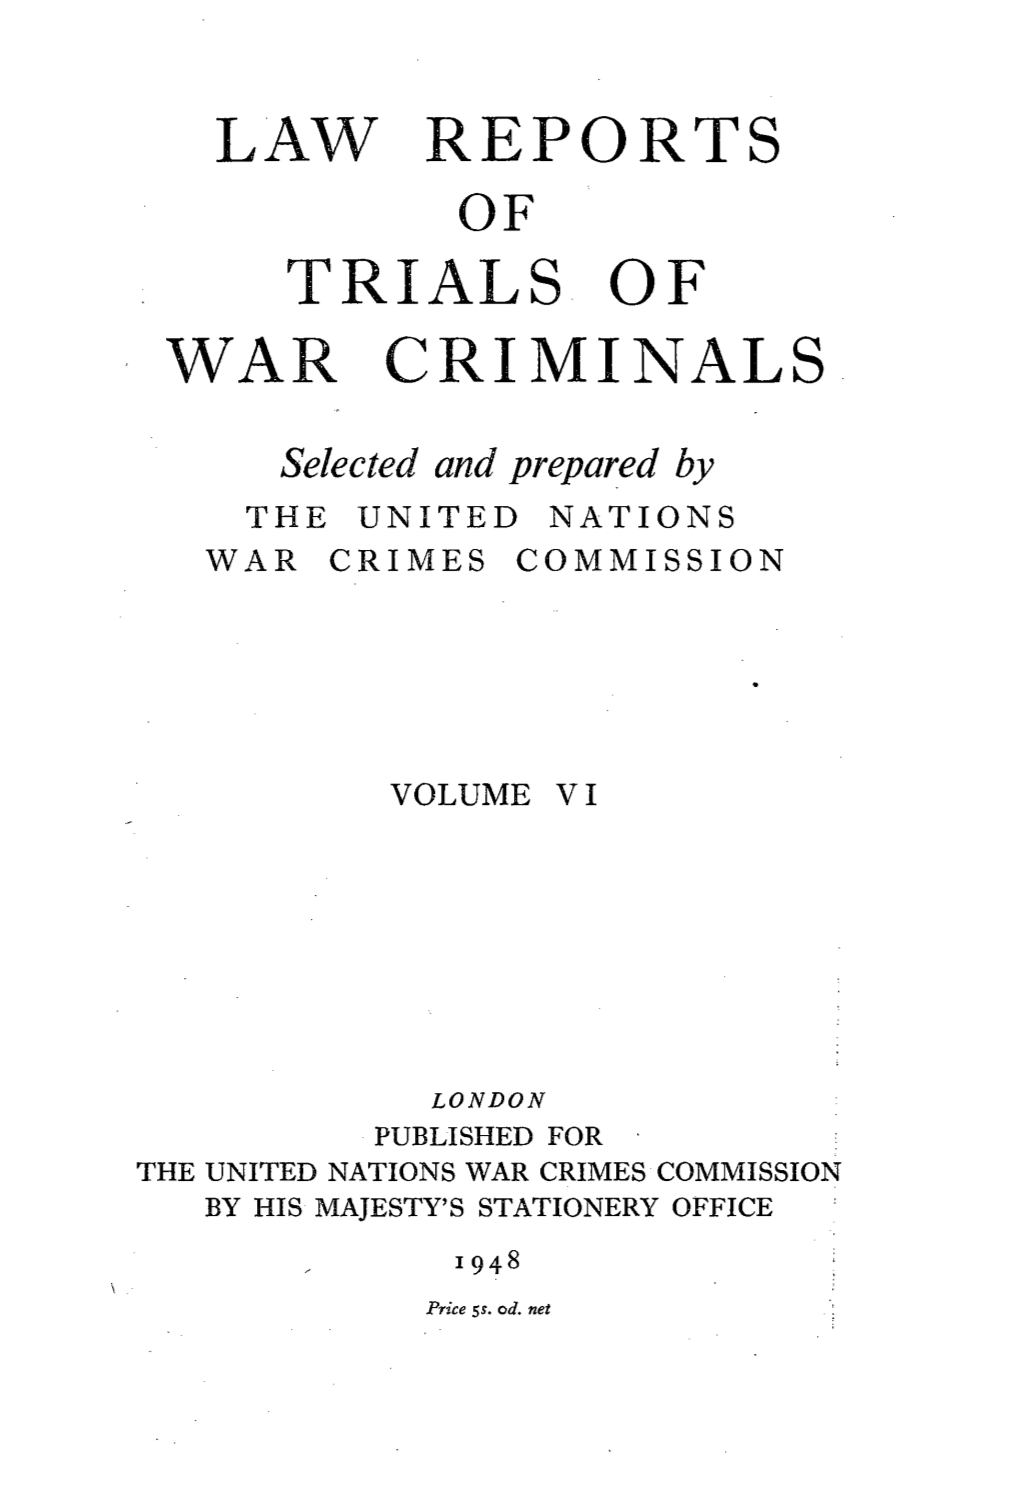 Law Reports of Trial of War Criminals, Volume VI